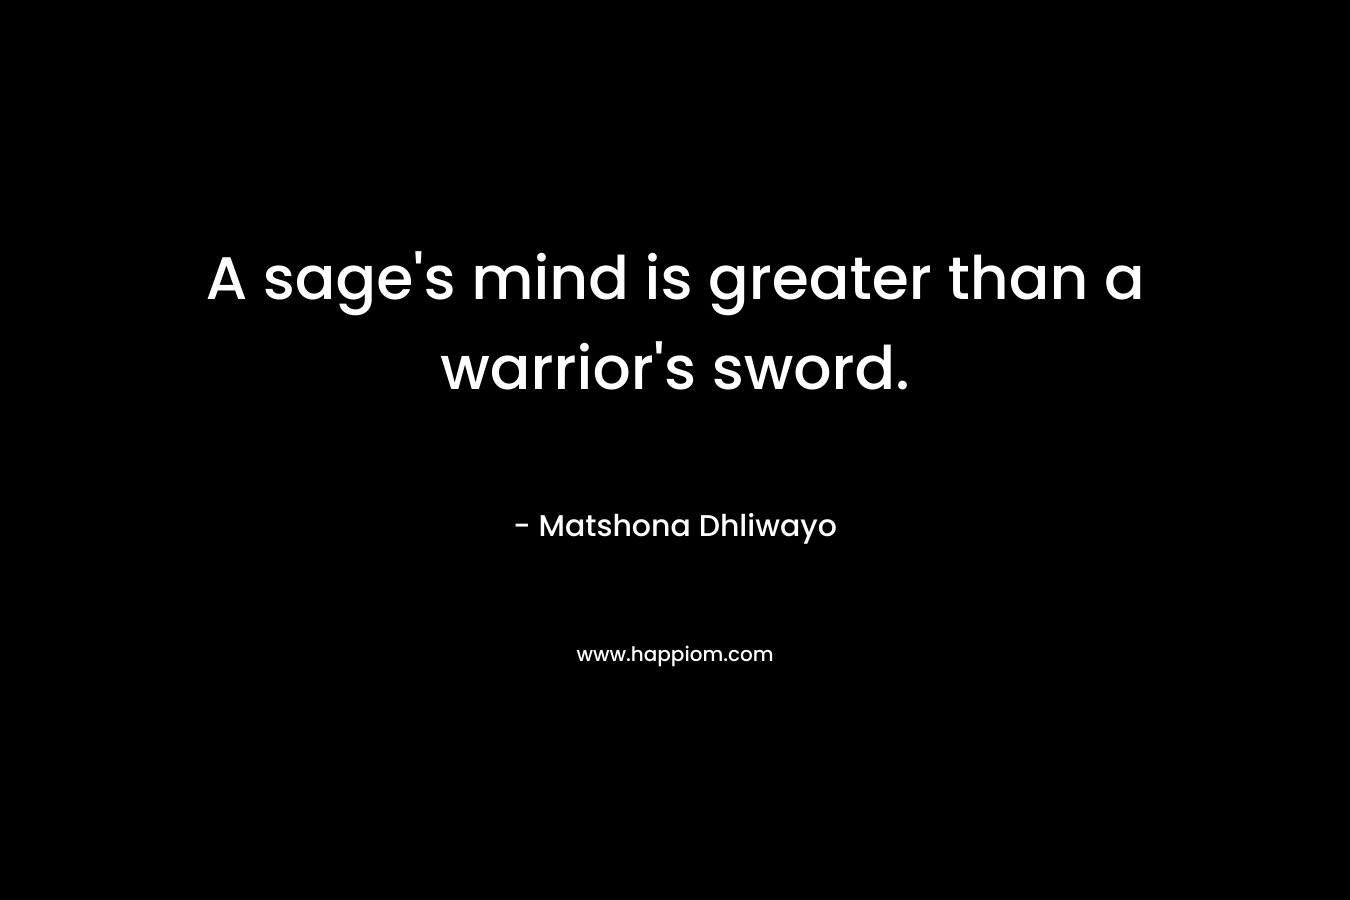 A sage’s mind is greater than a warrior’s sword. – Matshona Dhliwayo